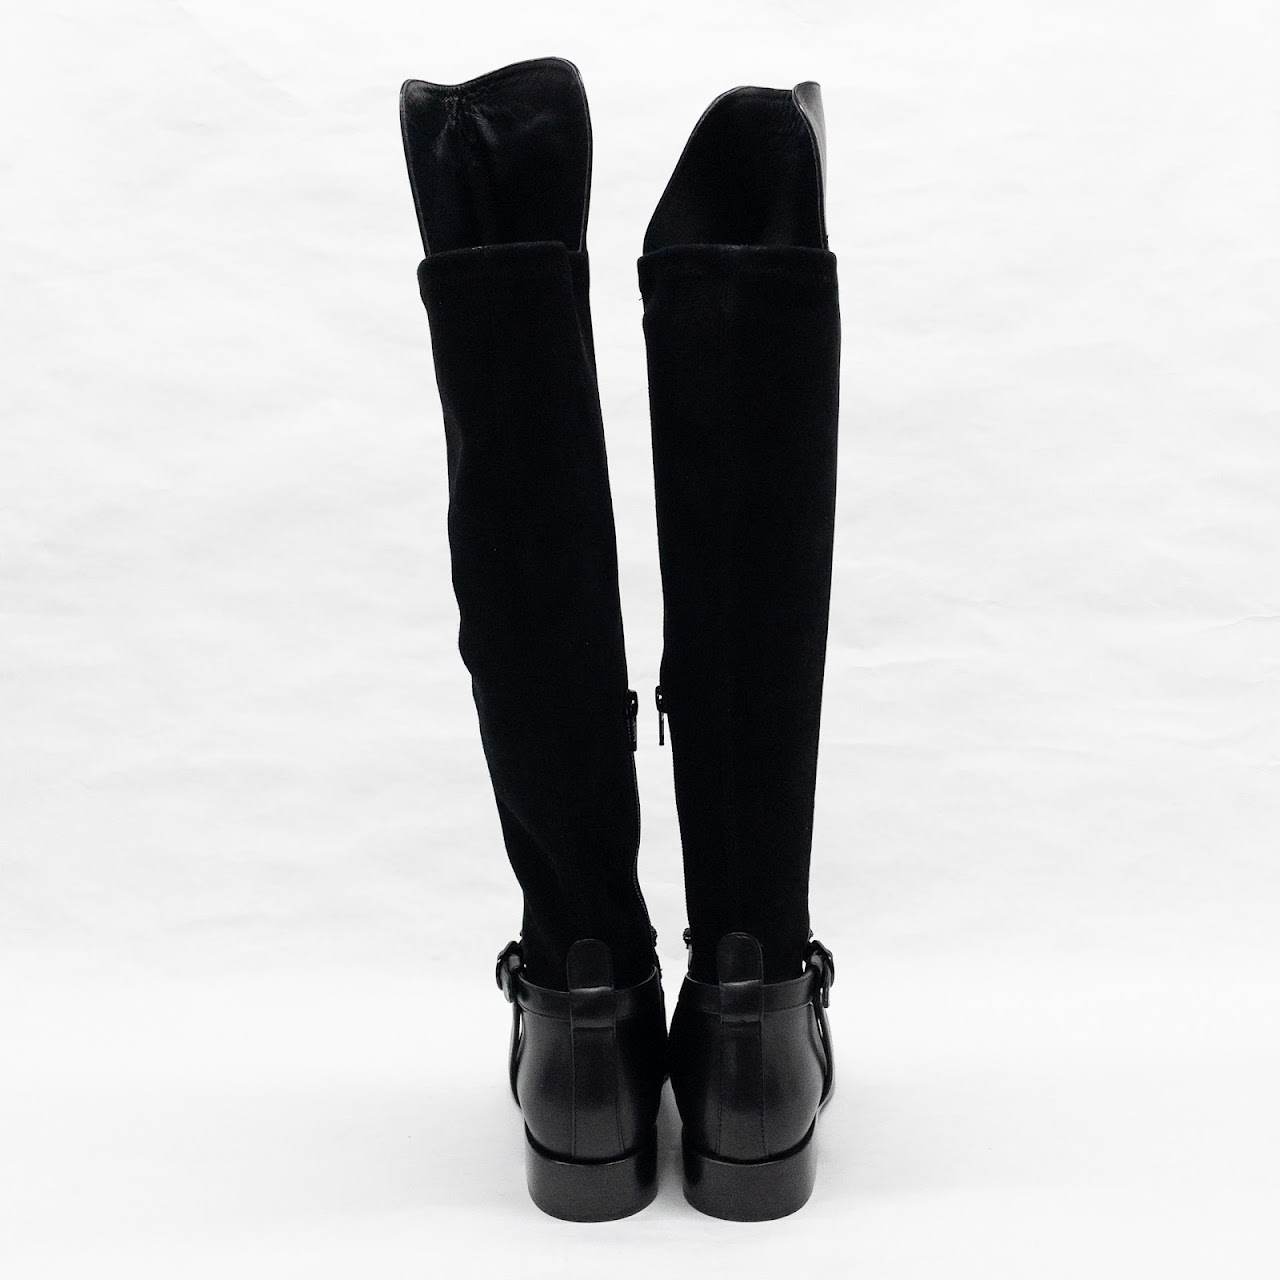 Versace MINT Black Leather & Suede Knee High Boots